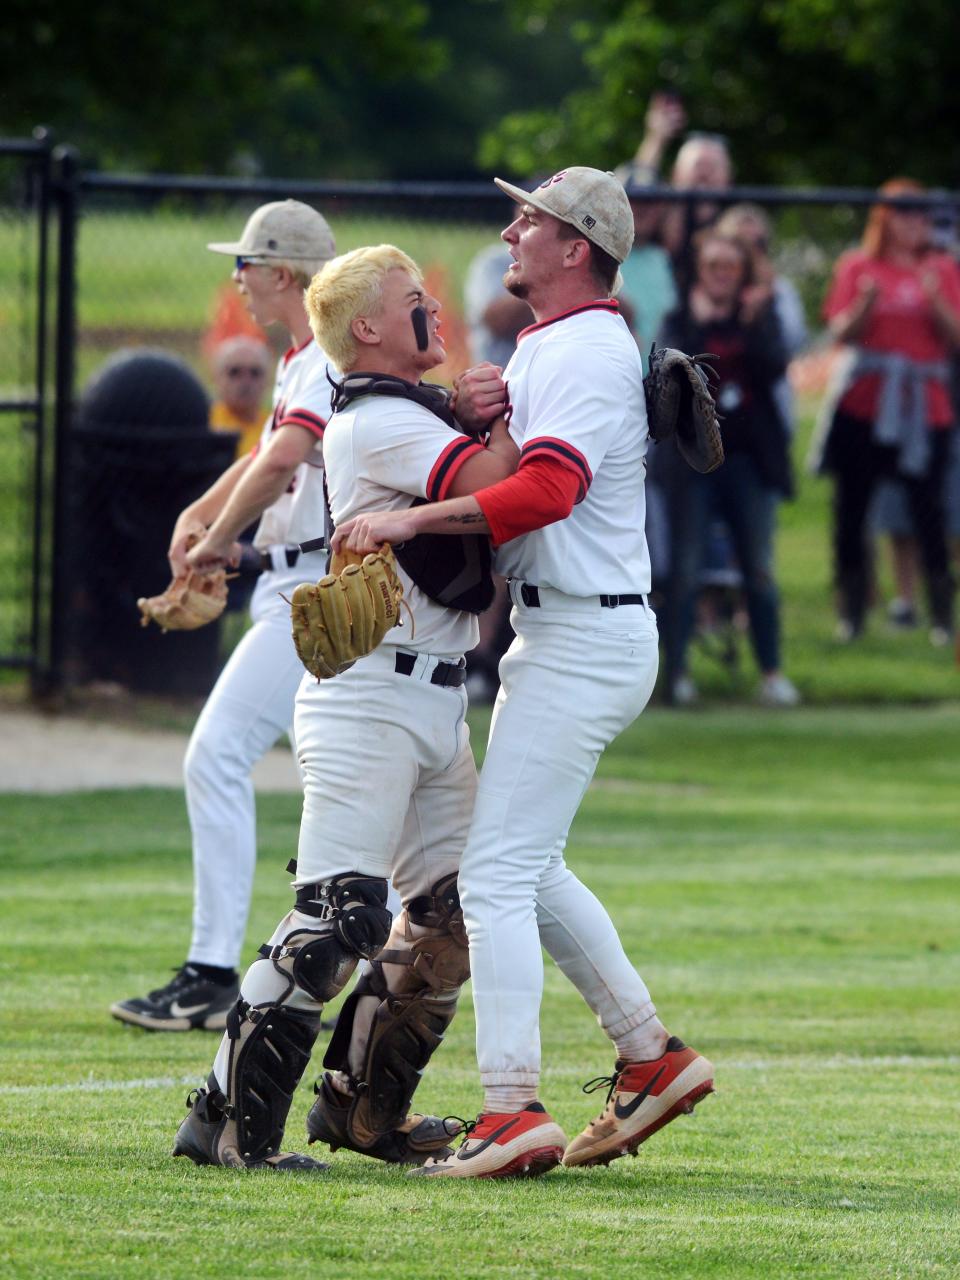 Liberty Union catcher Austin Ety, left, and pitcher Jacob Miller embrace after securing the final out of a 2-1 win against West Lafayette Ridgewood on Thursday in a Division III regional semifinal on Thursday at Mount Vernon High School.